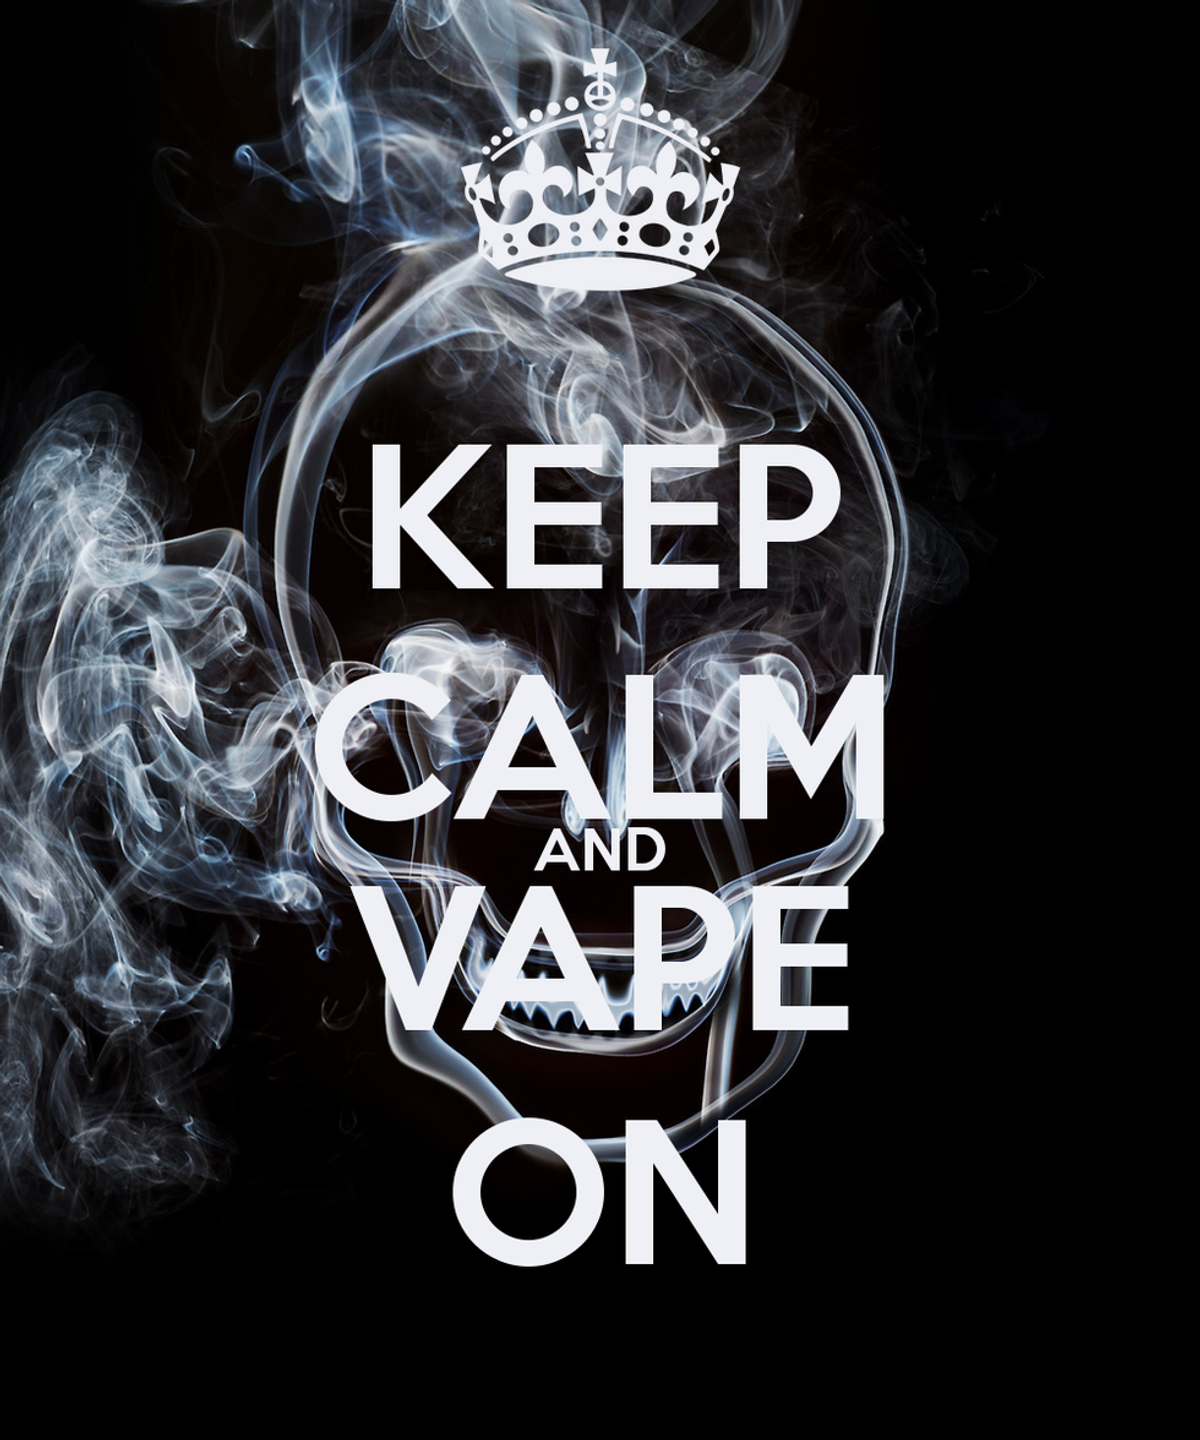 My View on Vaping